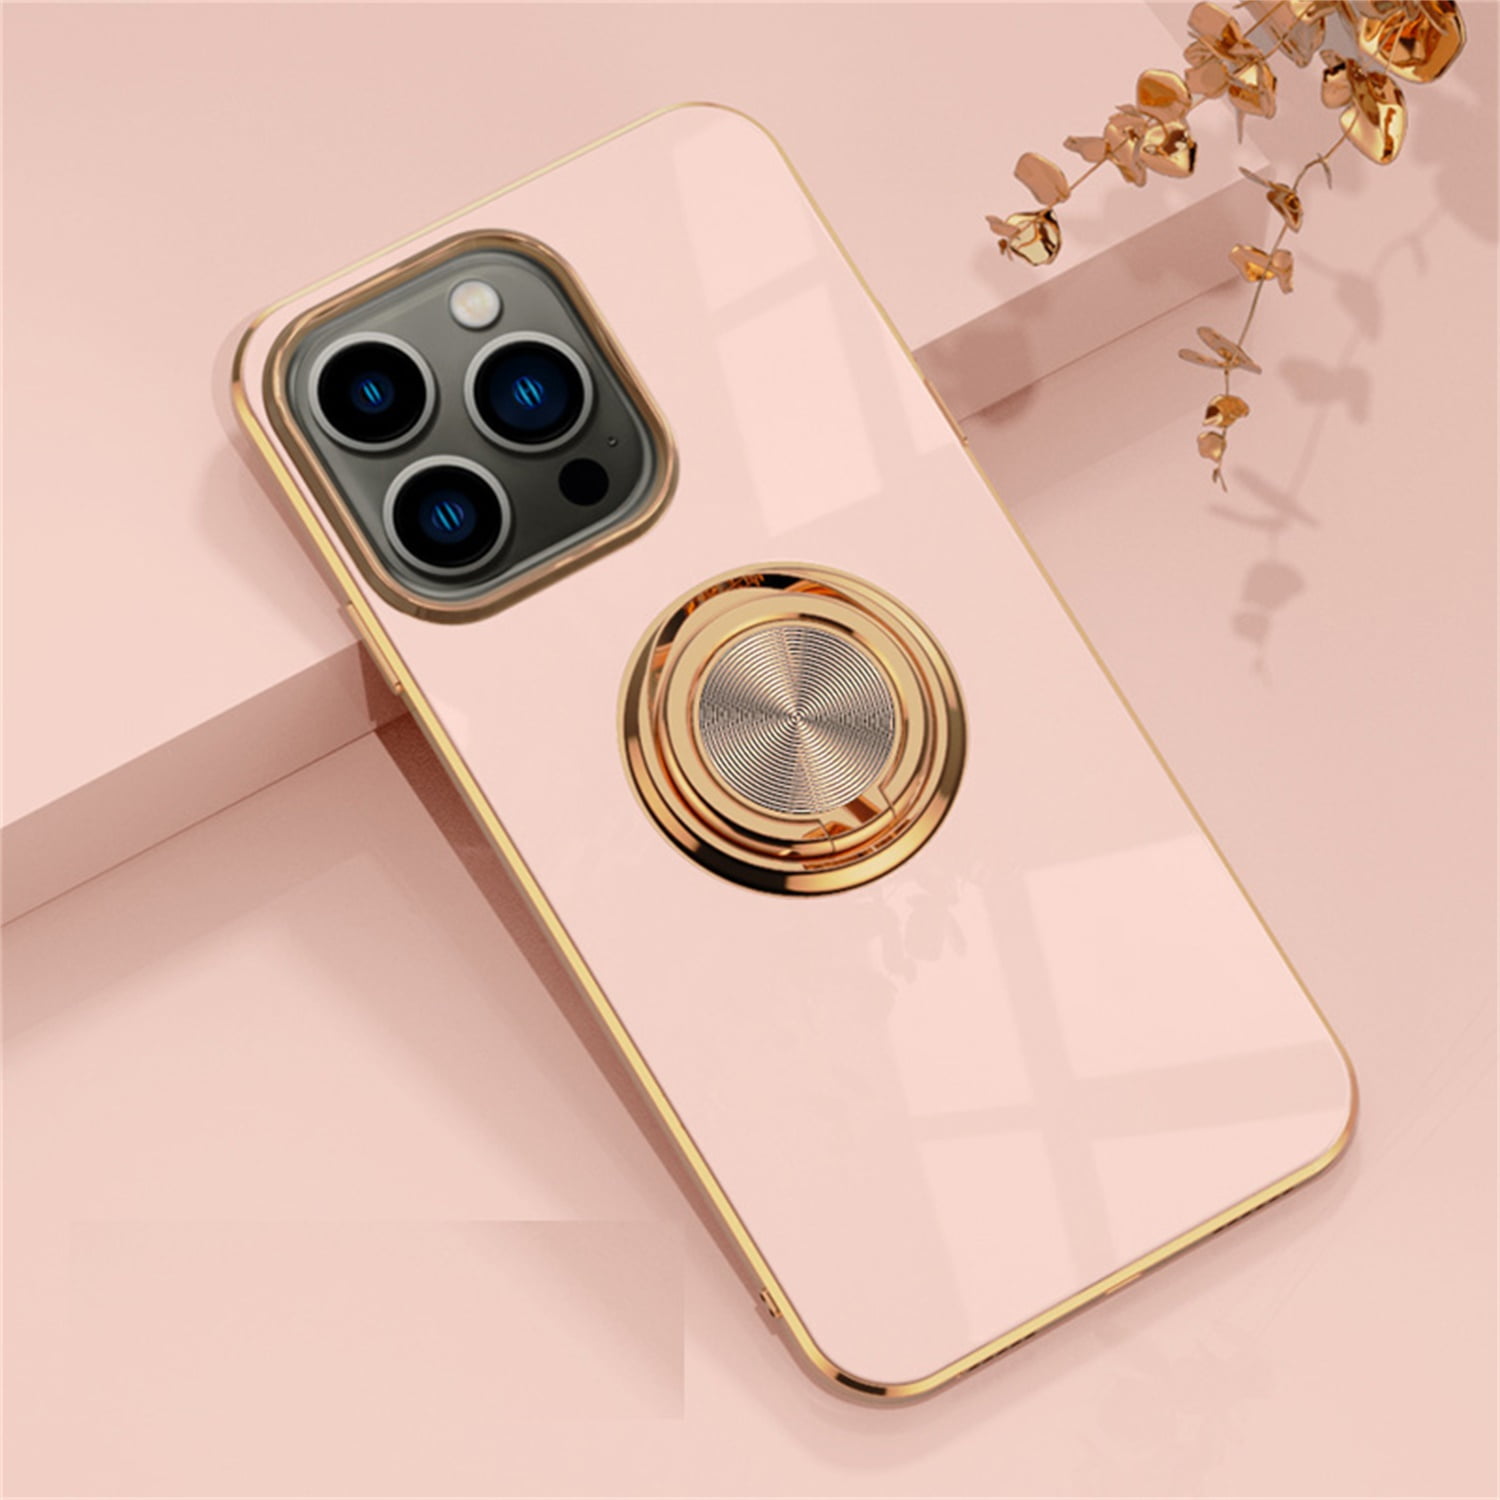  WOLLONY for iPhone 14 Pro Square Case Luxury Leather Case with  Kickstand Retro Elegant Diamond Ring Holder Case Soft TPU Metal Edge  Shockproof Drop Protection Case for iPhone 14 Pro 6.1